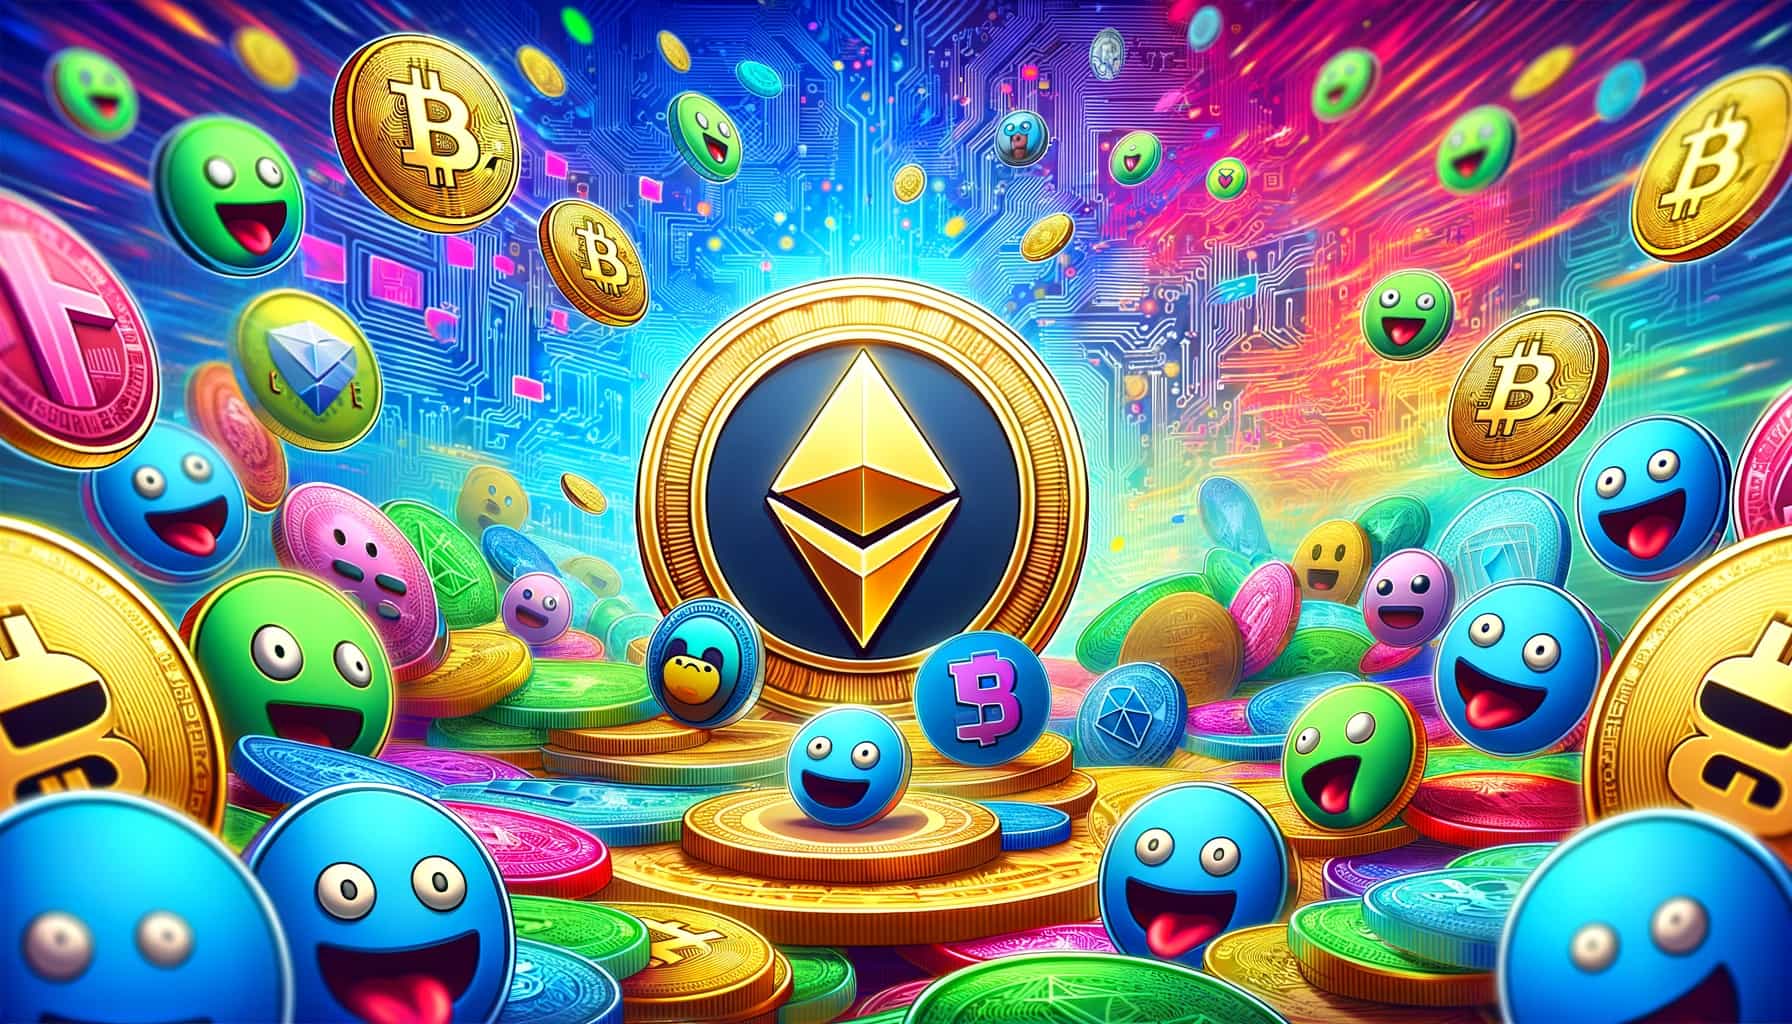 Ethereum in center of meme coins and blockchains